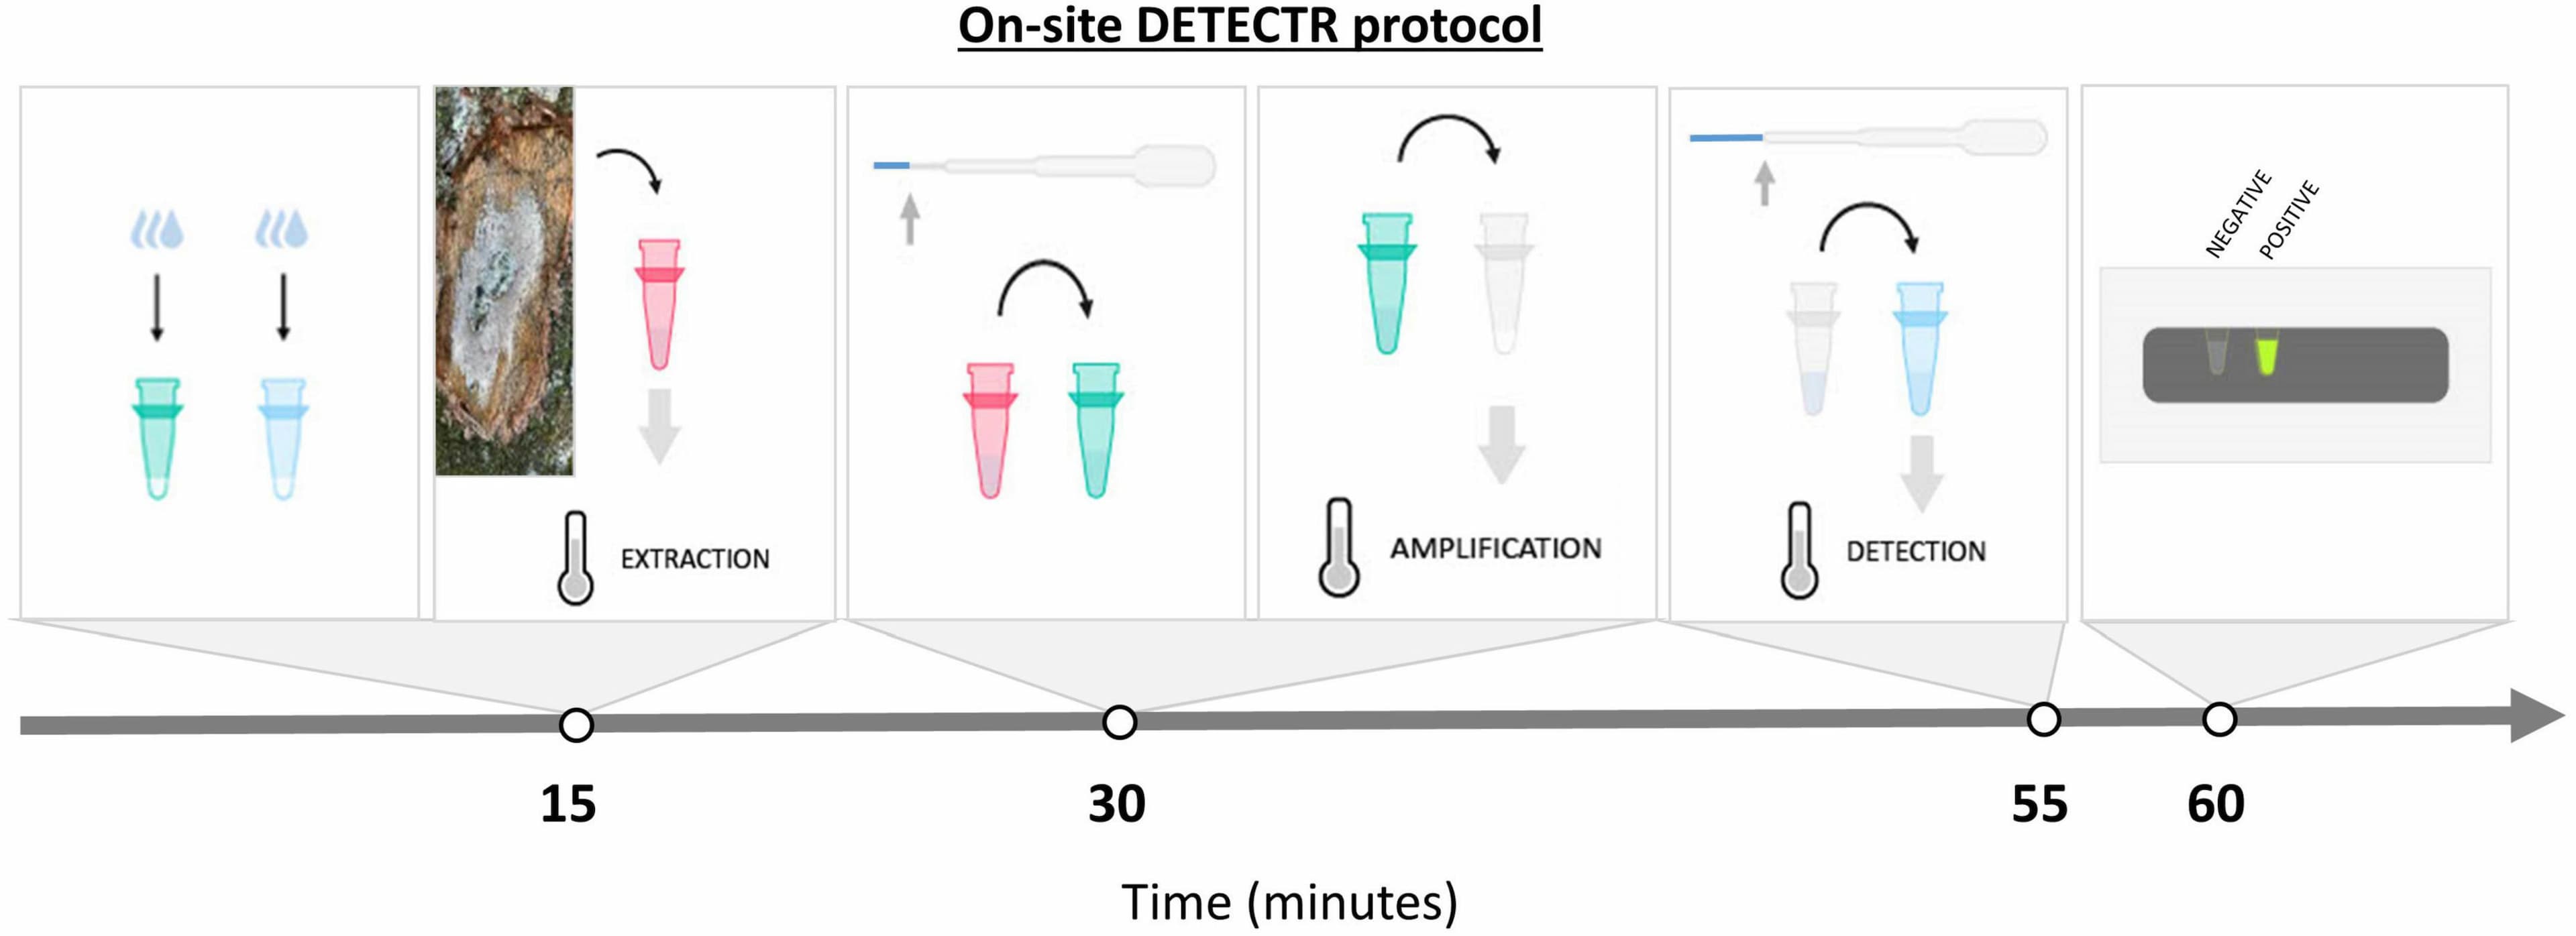 Benchmarking a fast and simple on-site detection assay  - Frontiers